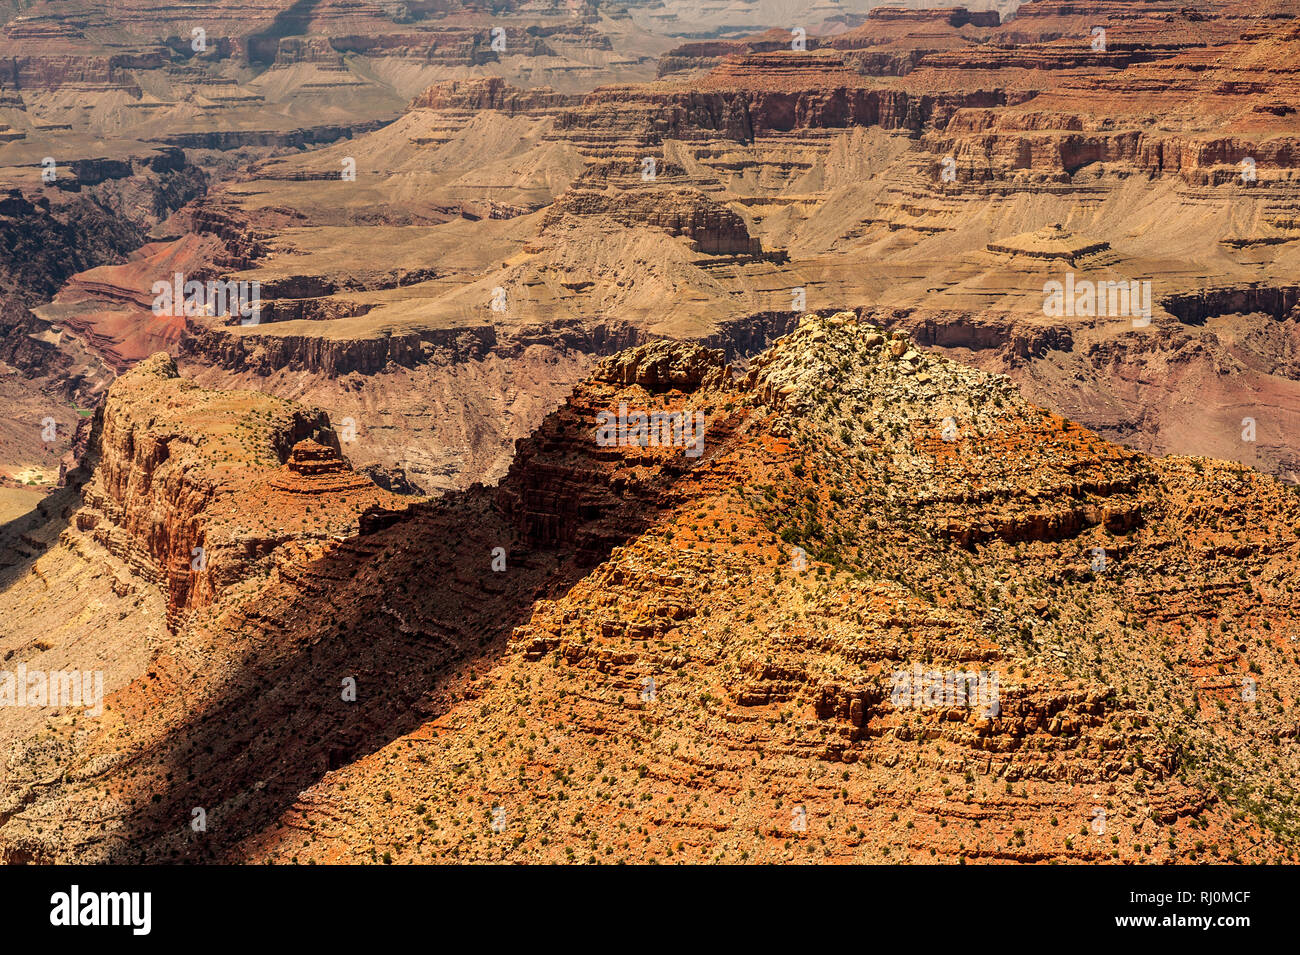 Rock formations of the Grand Canyon as viewed from the South Rim, Arizona, United States of America, North America Stock Photo